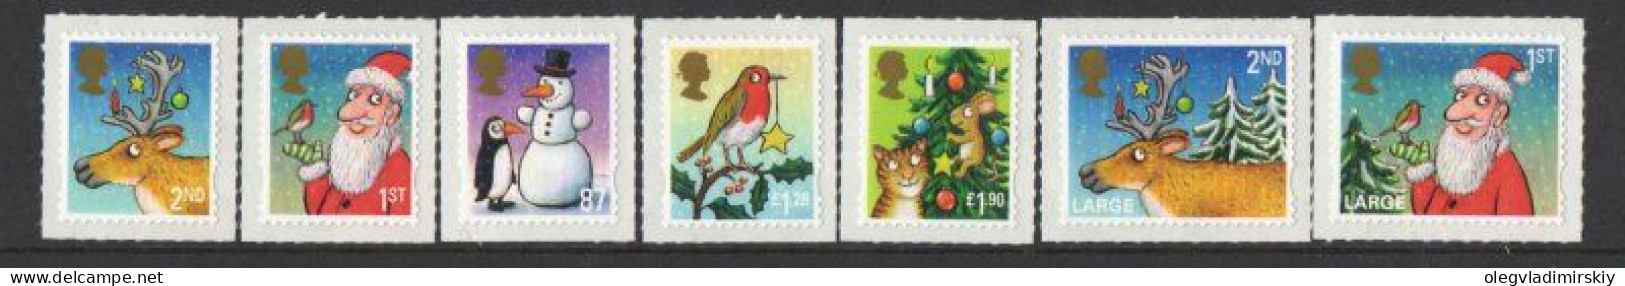 Great Britain United Kingdom 2012 Christmas Set Of 7 Self-adhesive Stamps MNH - Natale